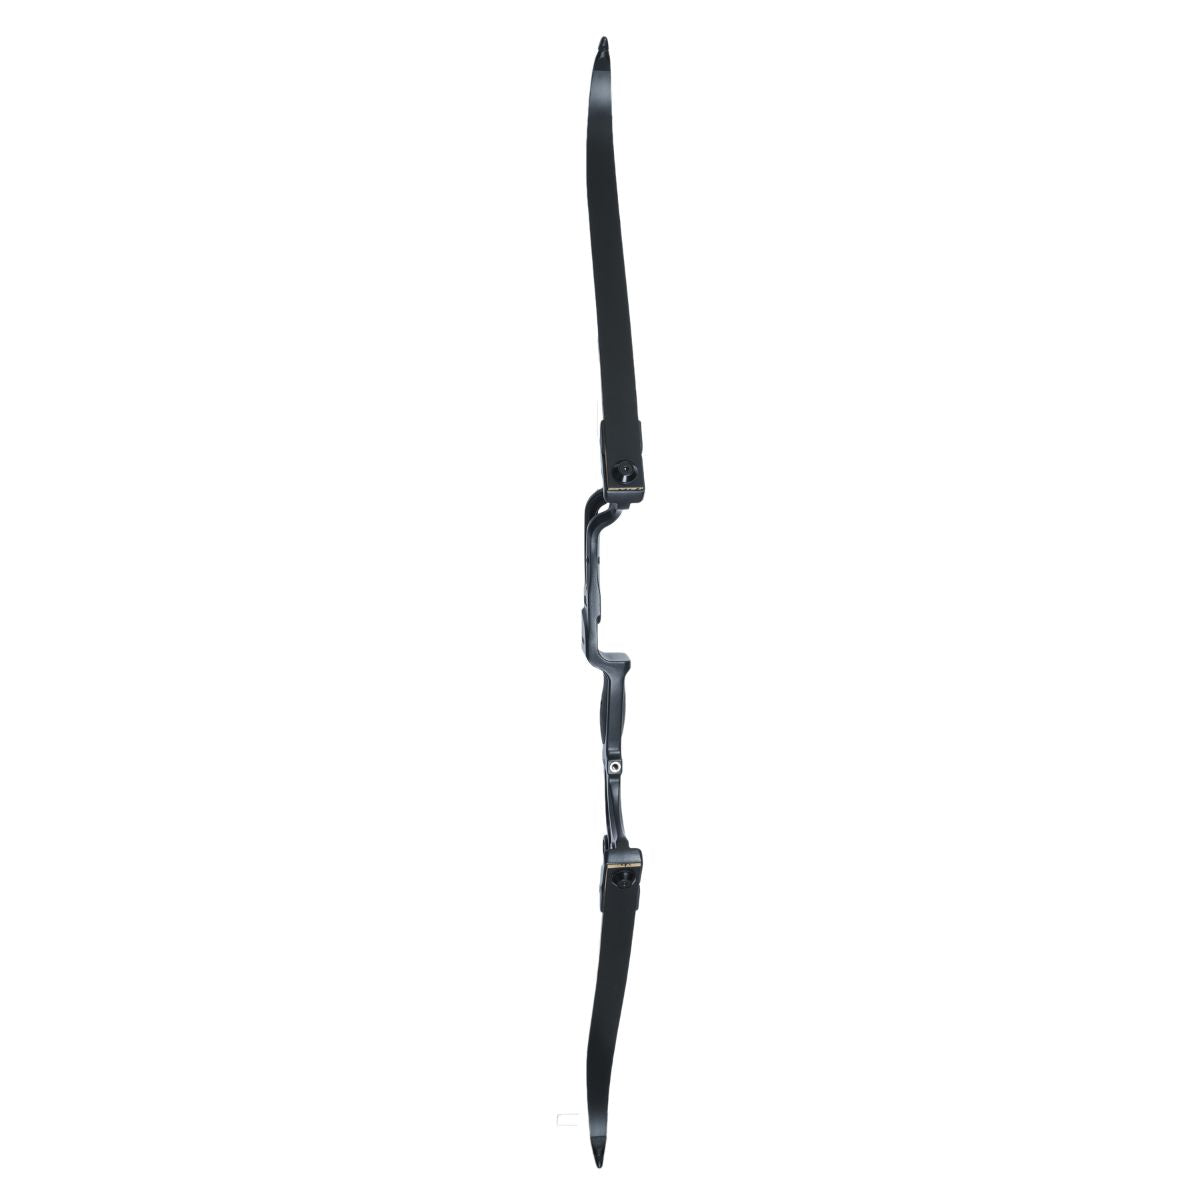 Scorpion Re-Curve Bow - AS-R163 3